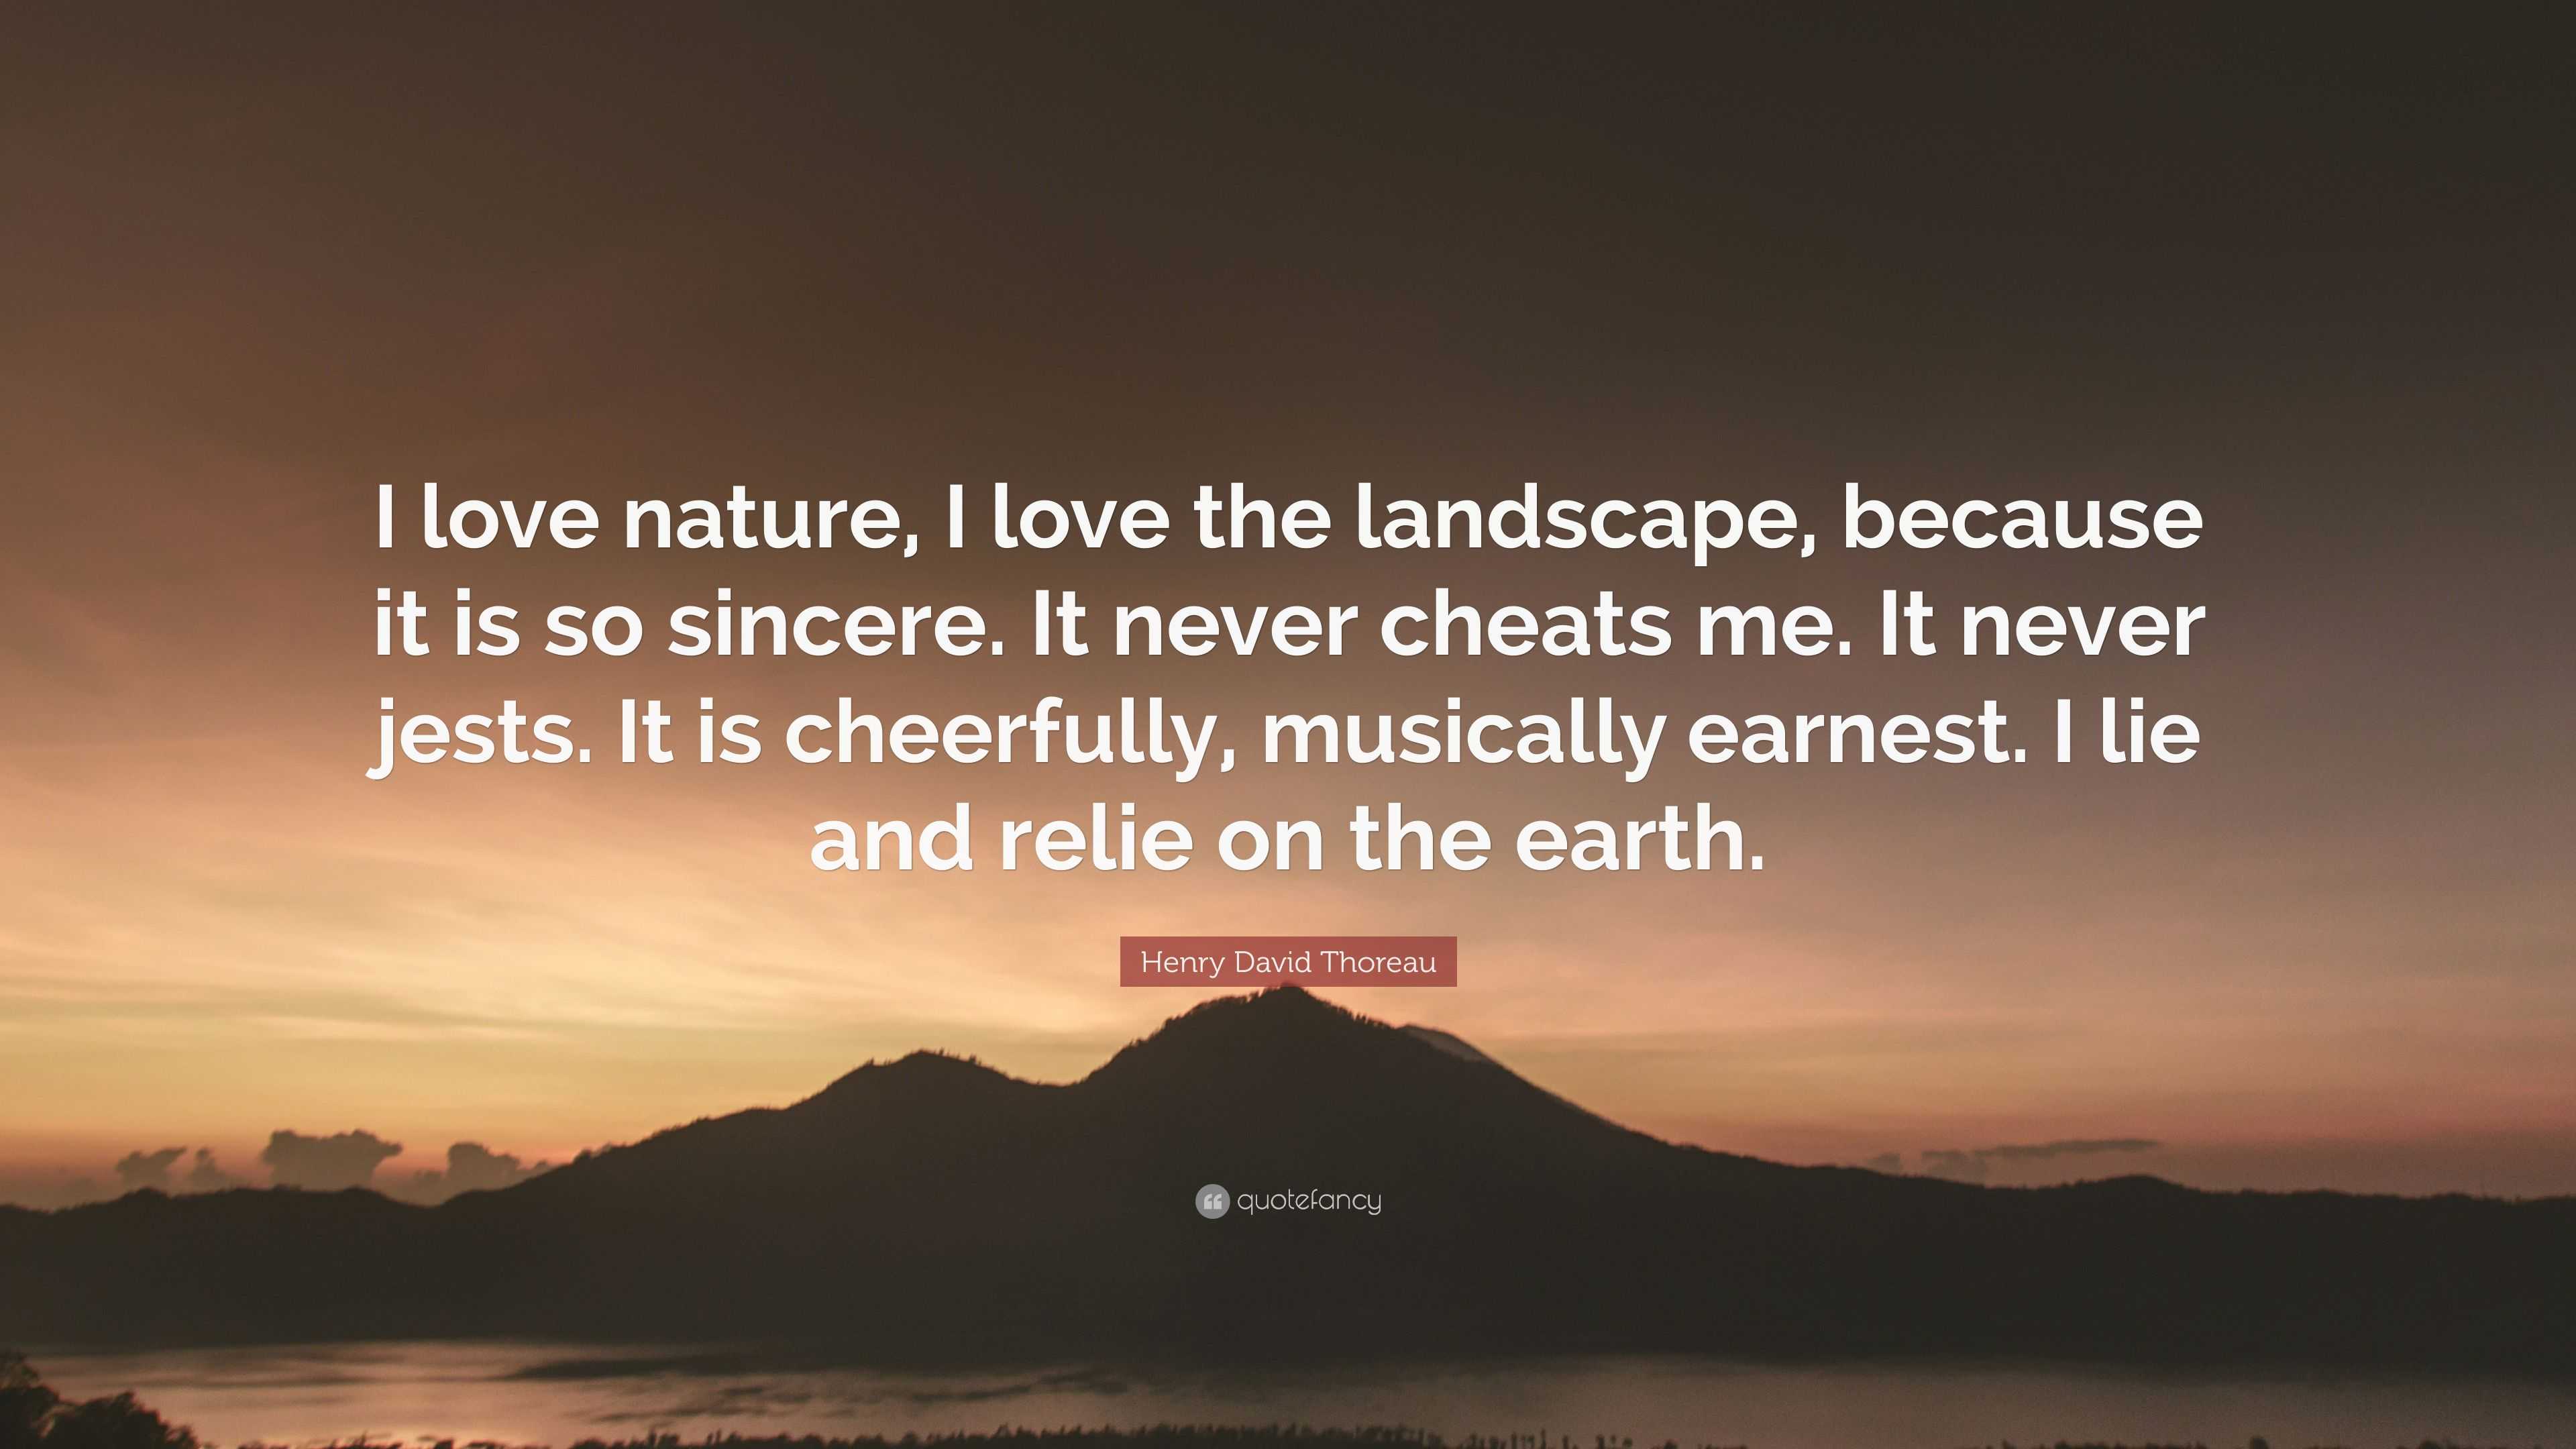 Henry David Thoreau Quote: “I love nature, I love the landscape, because it is so sincere. never cheats me. It never jests. It is cheerfully, mus...”